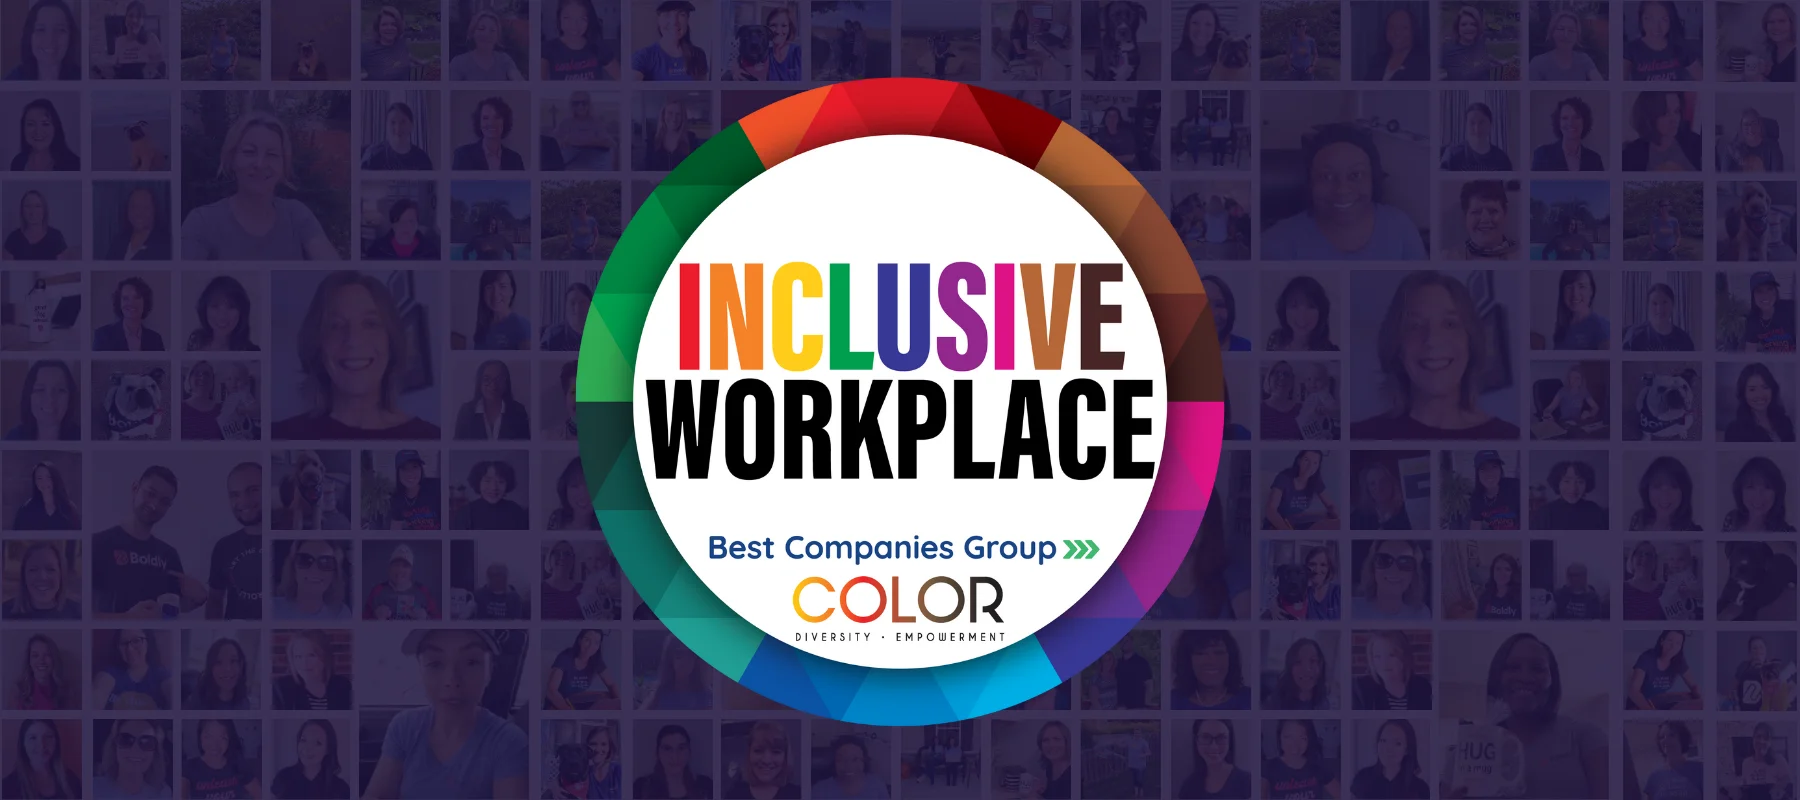 Inclusive workplace logo - Boldly has been named a top inclusive workplace by Best Companies Group and COLOR Magazine.